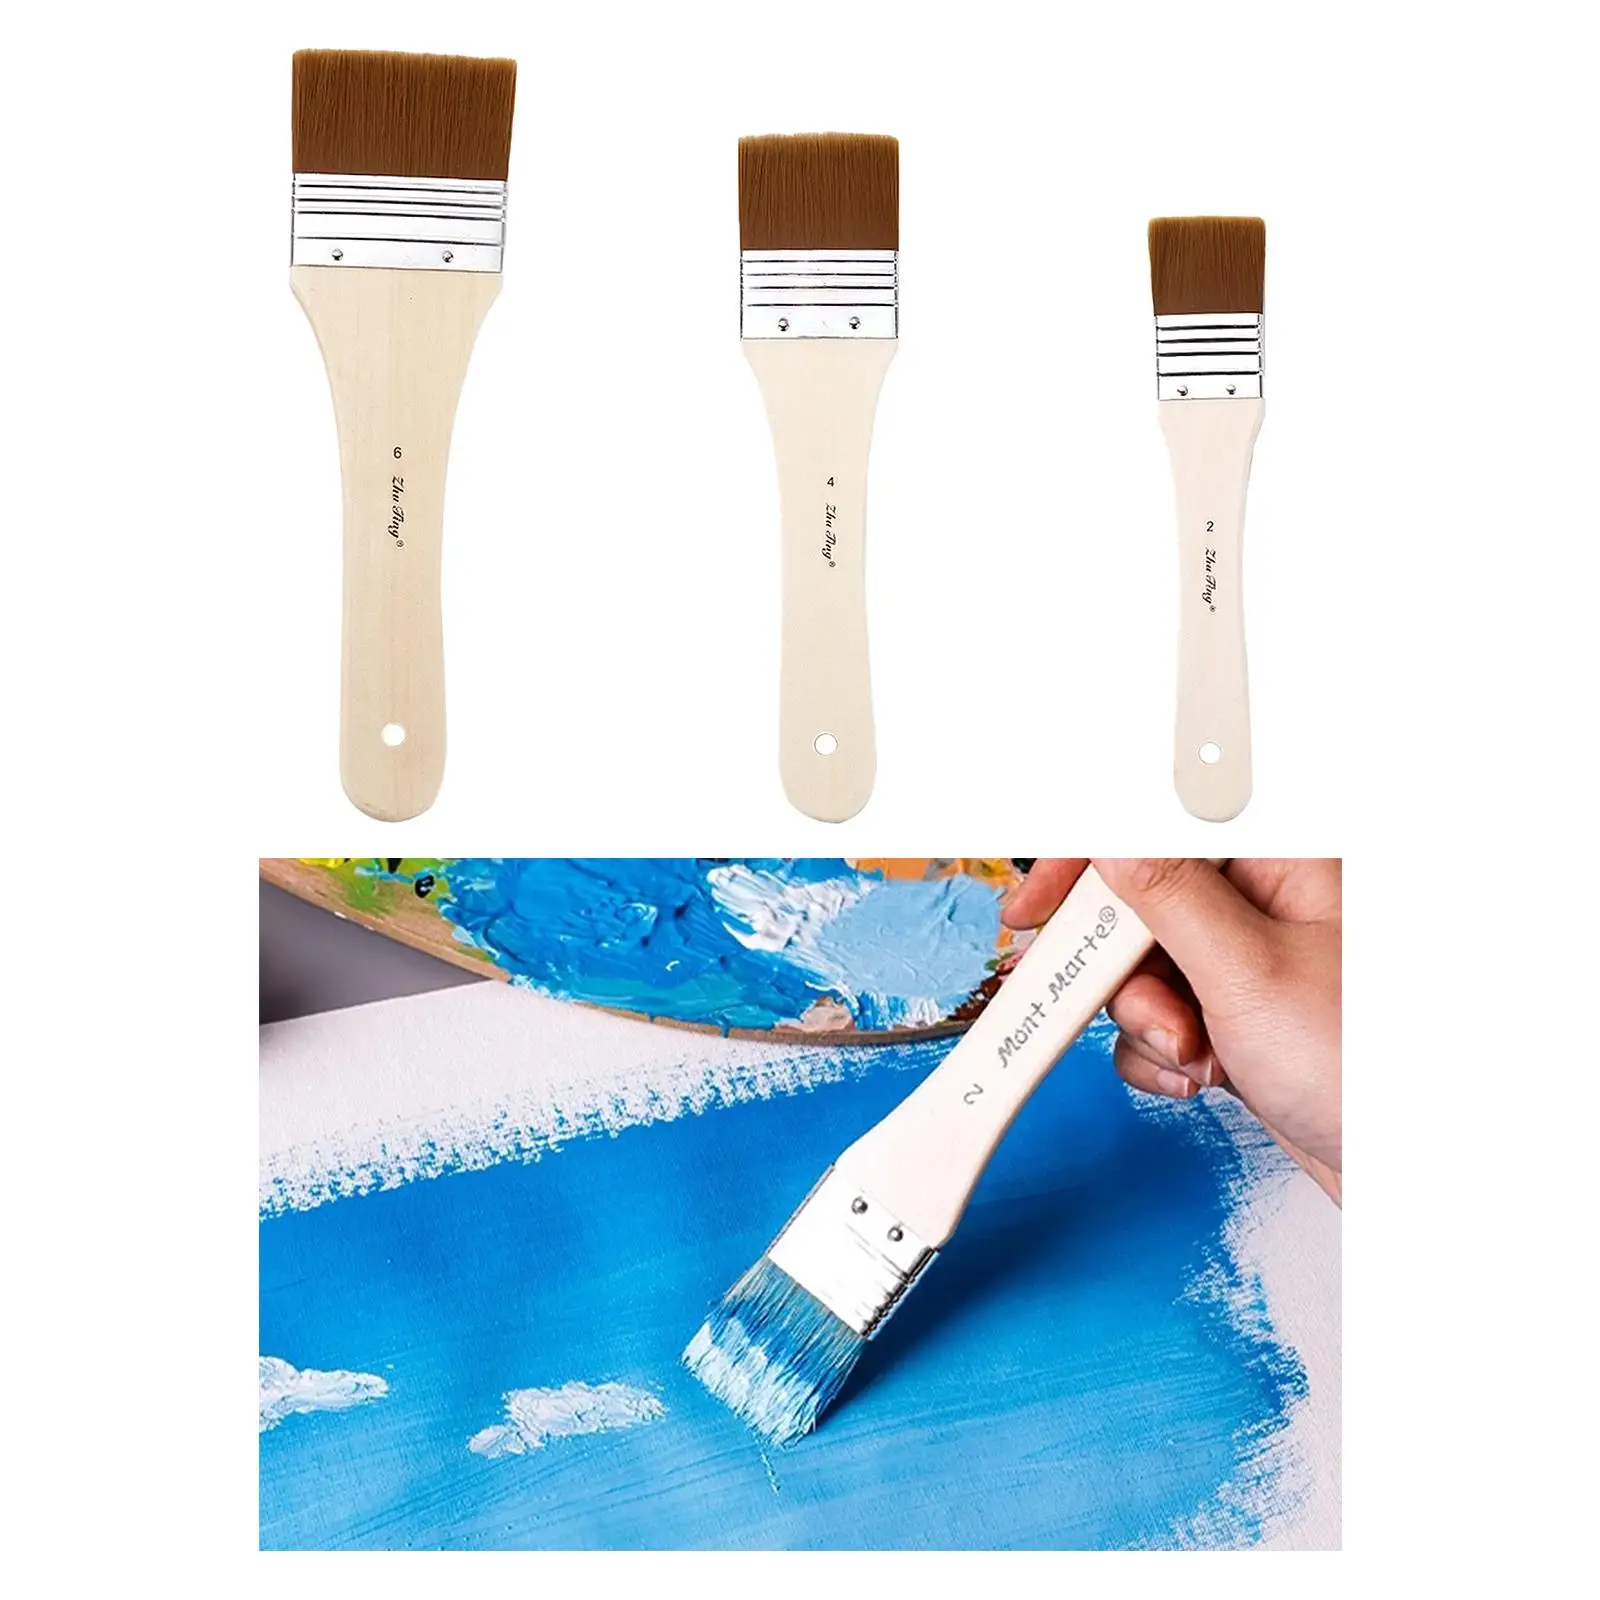 3x Paint Brushes, Wood Handle, Paint Brushes Set, for Oil Painting, Brush, Washable and Reusable